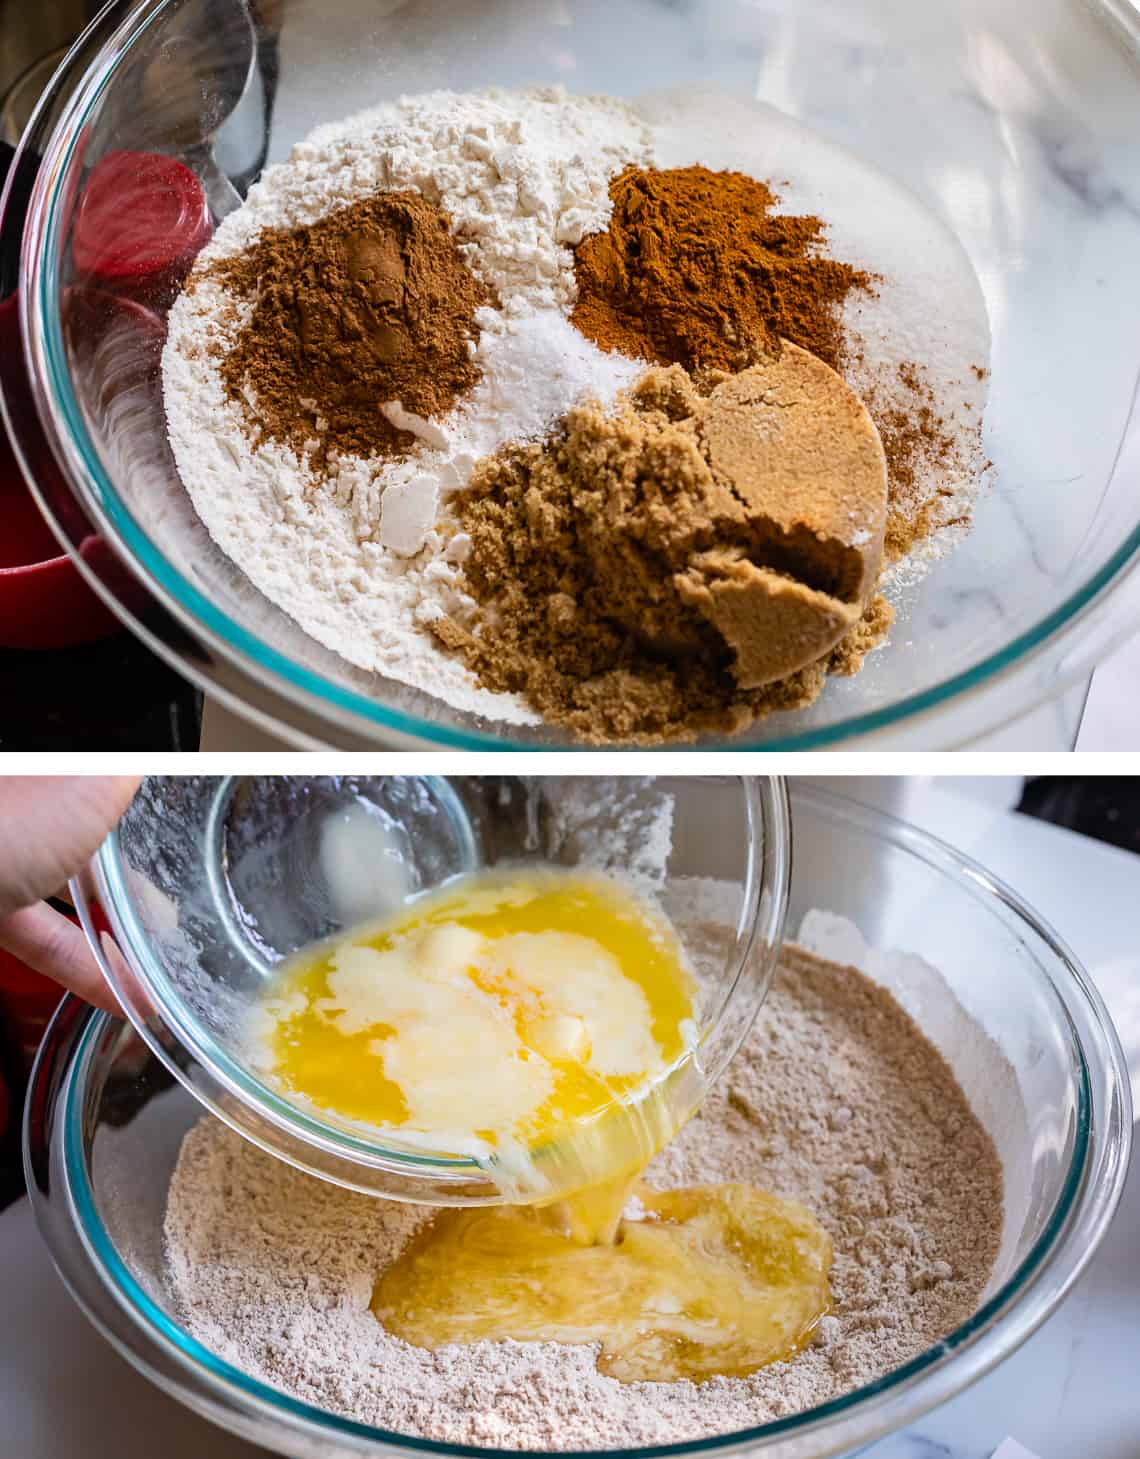 dry ingredients in a glass bowl, adding melted butter to the bowl.